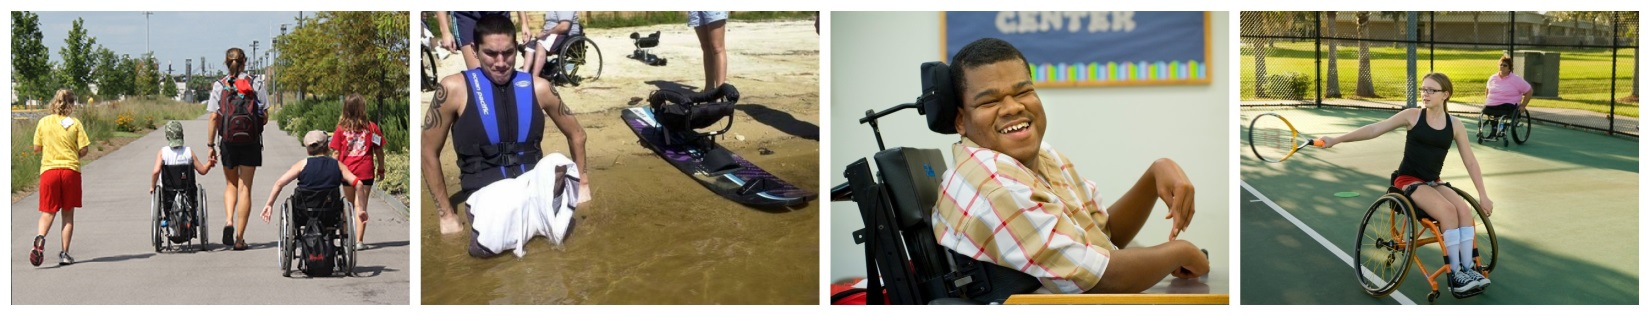 various images of people with disabilities being physically active at a park, on a tennis court, and in the water